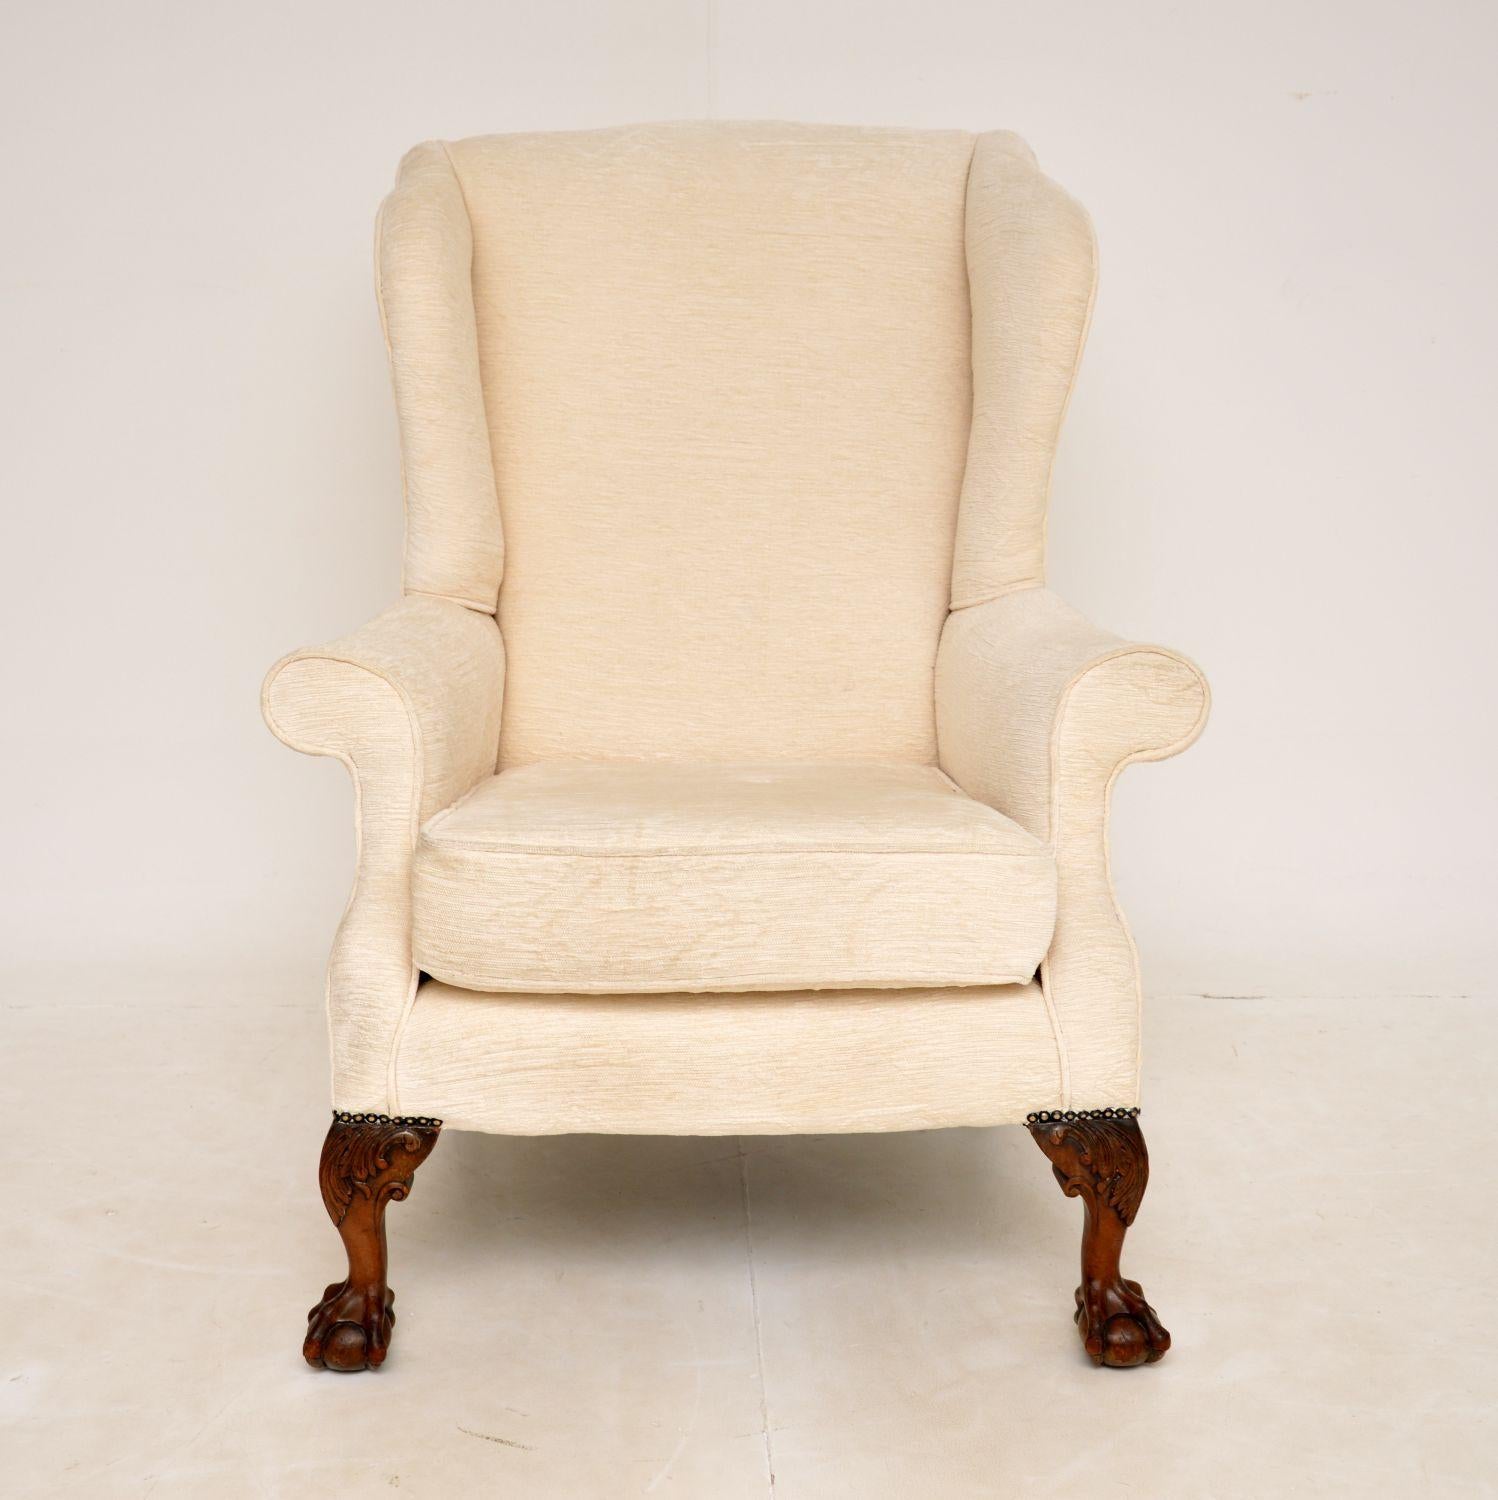 A smart and extremely comfortable antique wing back armchair in the classic Chippendale style. This was made in England, it dates from around the 1910-1920’s period.

It is of super quality, the previous owner had it re-upholstered in this lovely